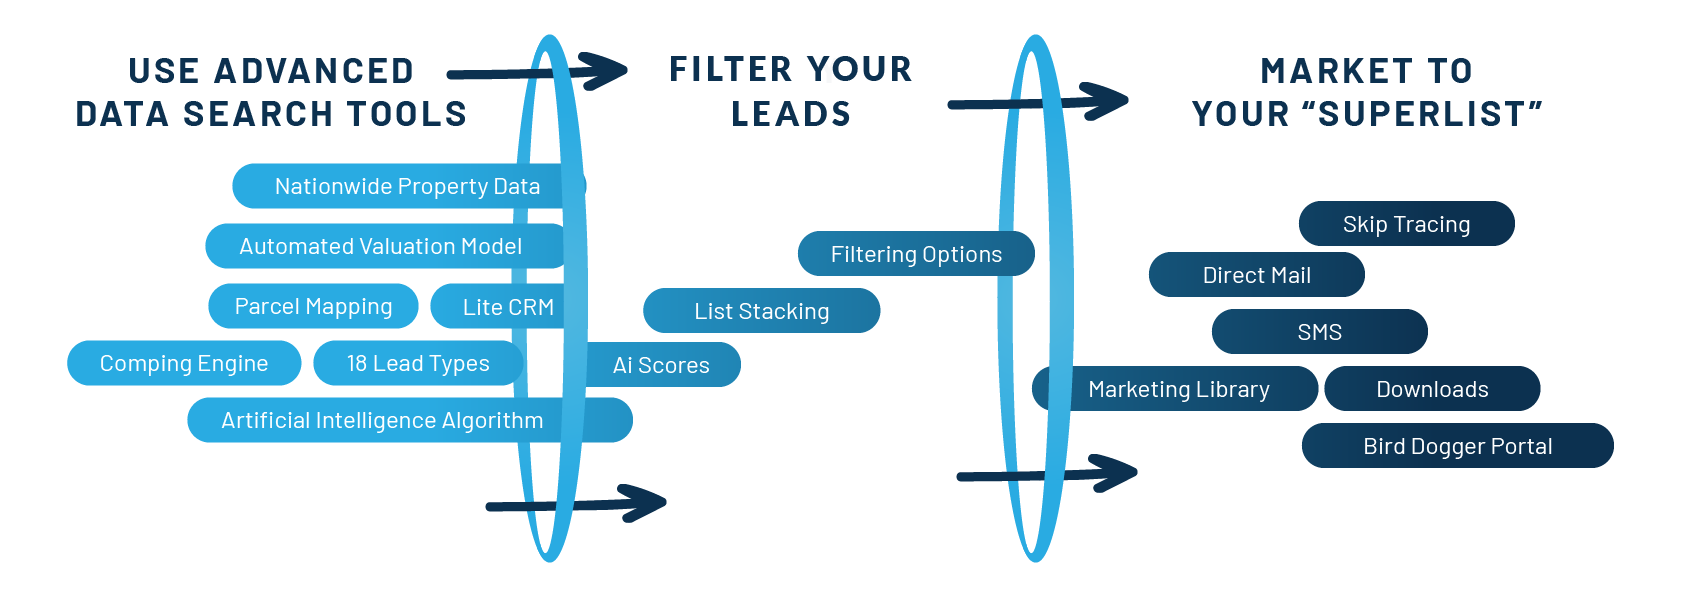 visualization of real estate lead filters used by Leadflow